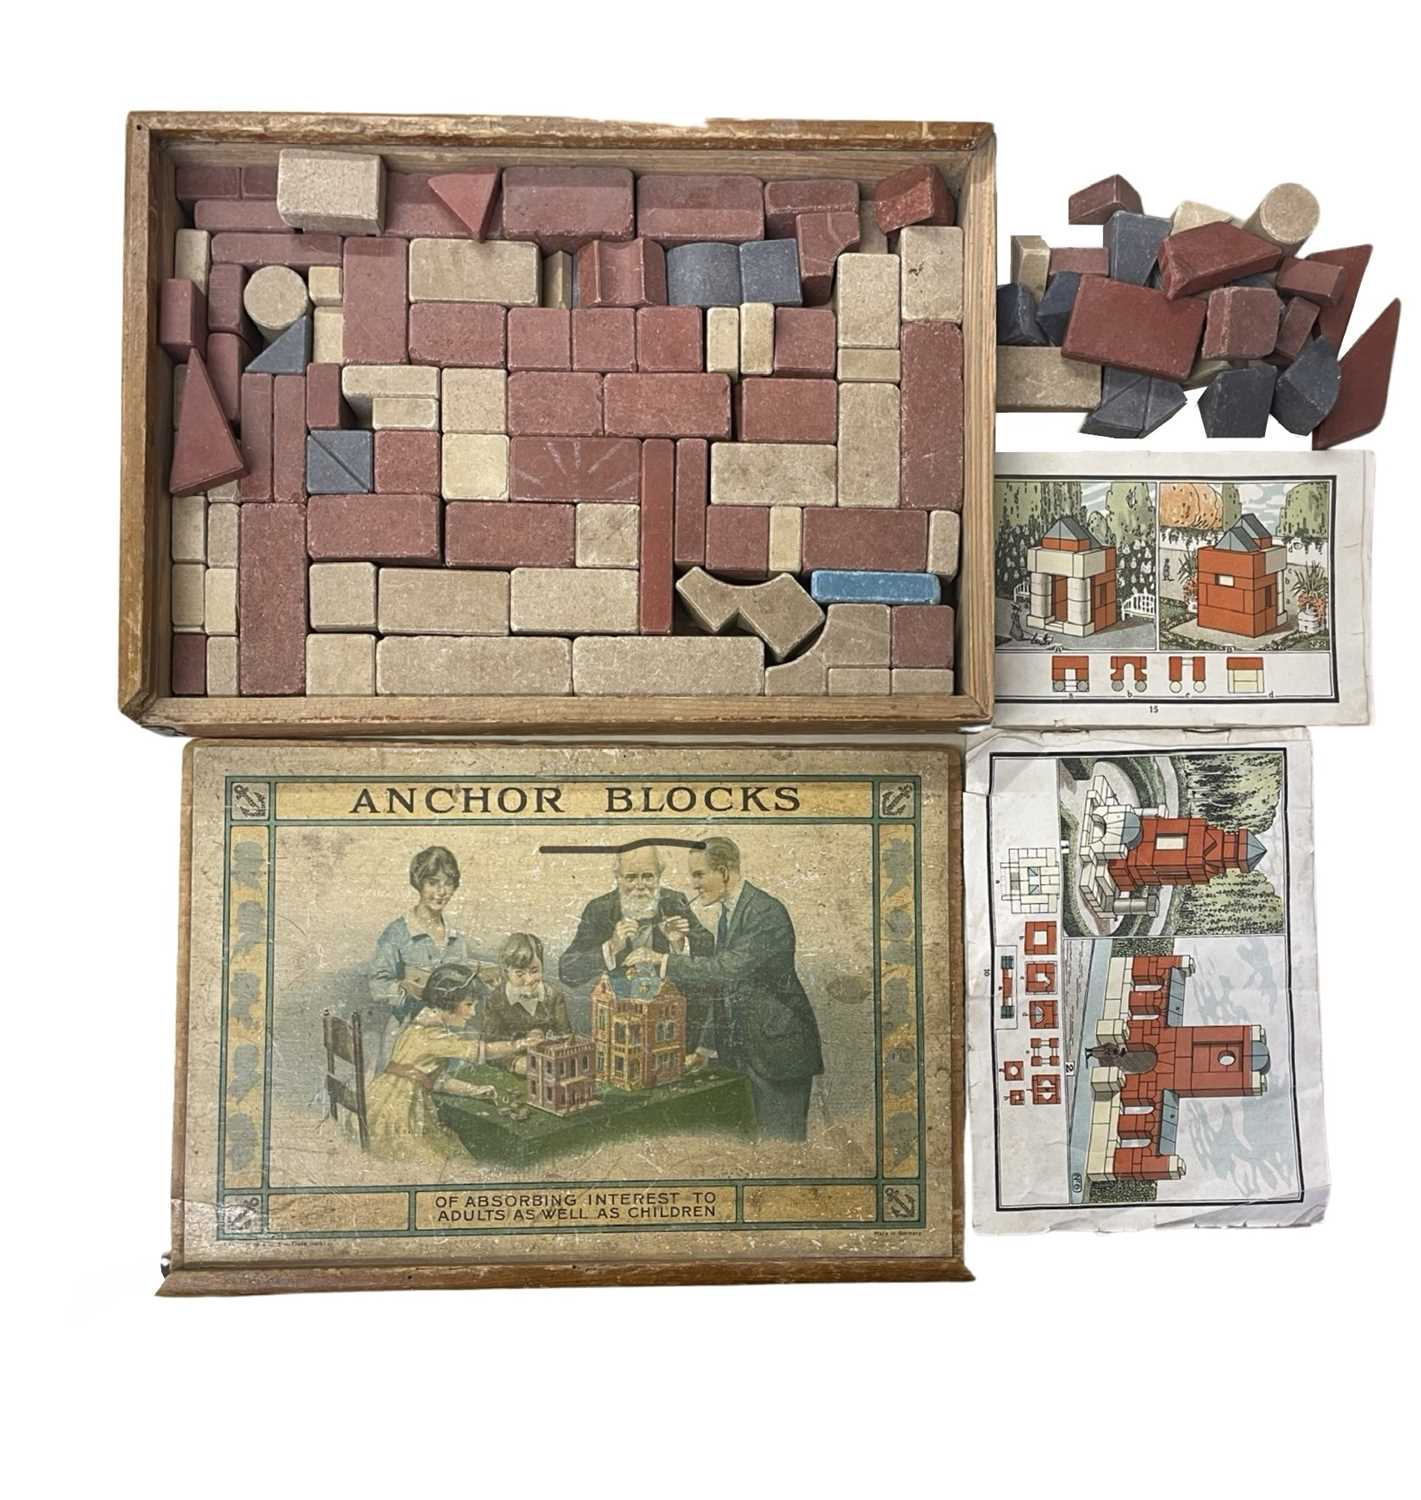 A wooden-boxed set of Anchor Blocks masonry building pieces, with original instructions and